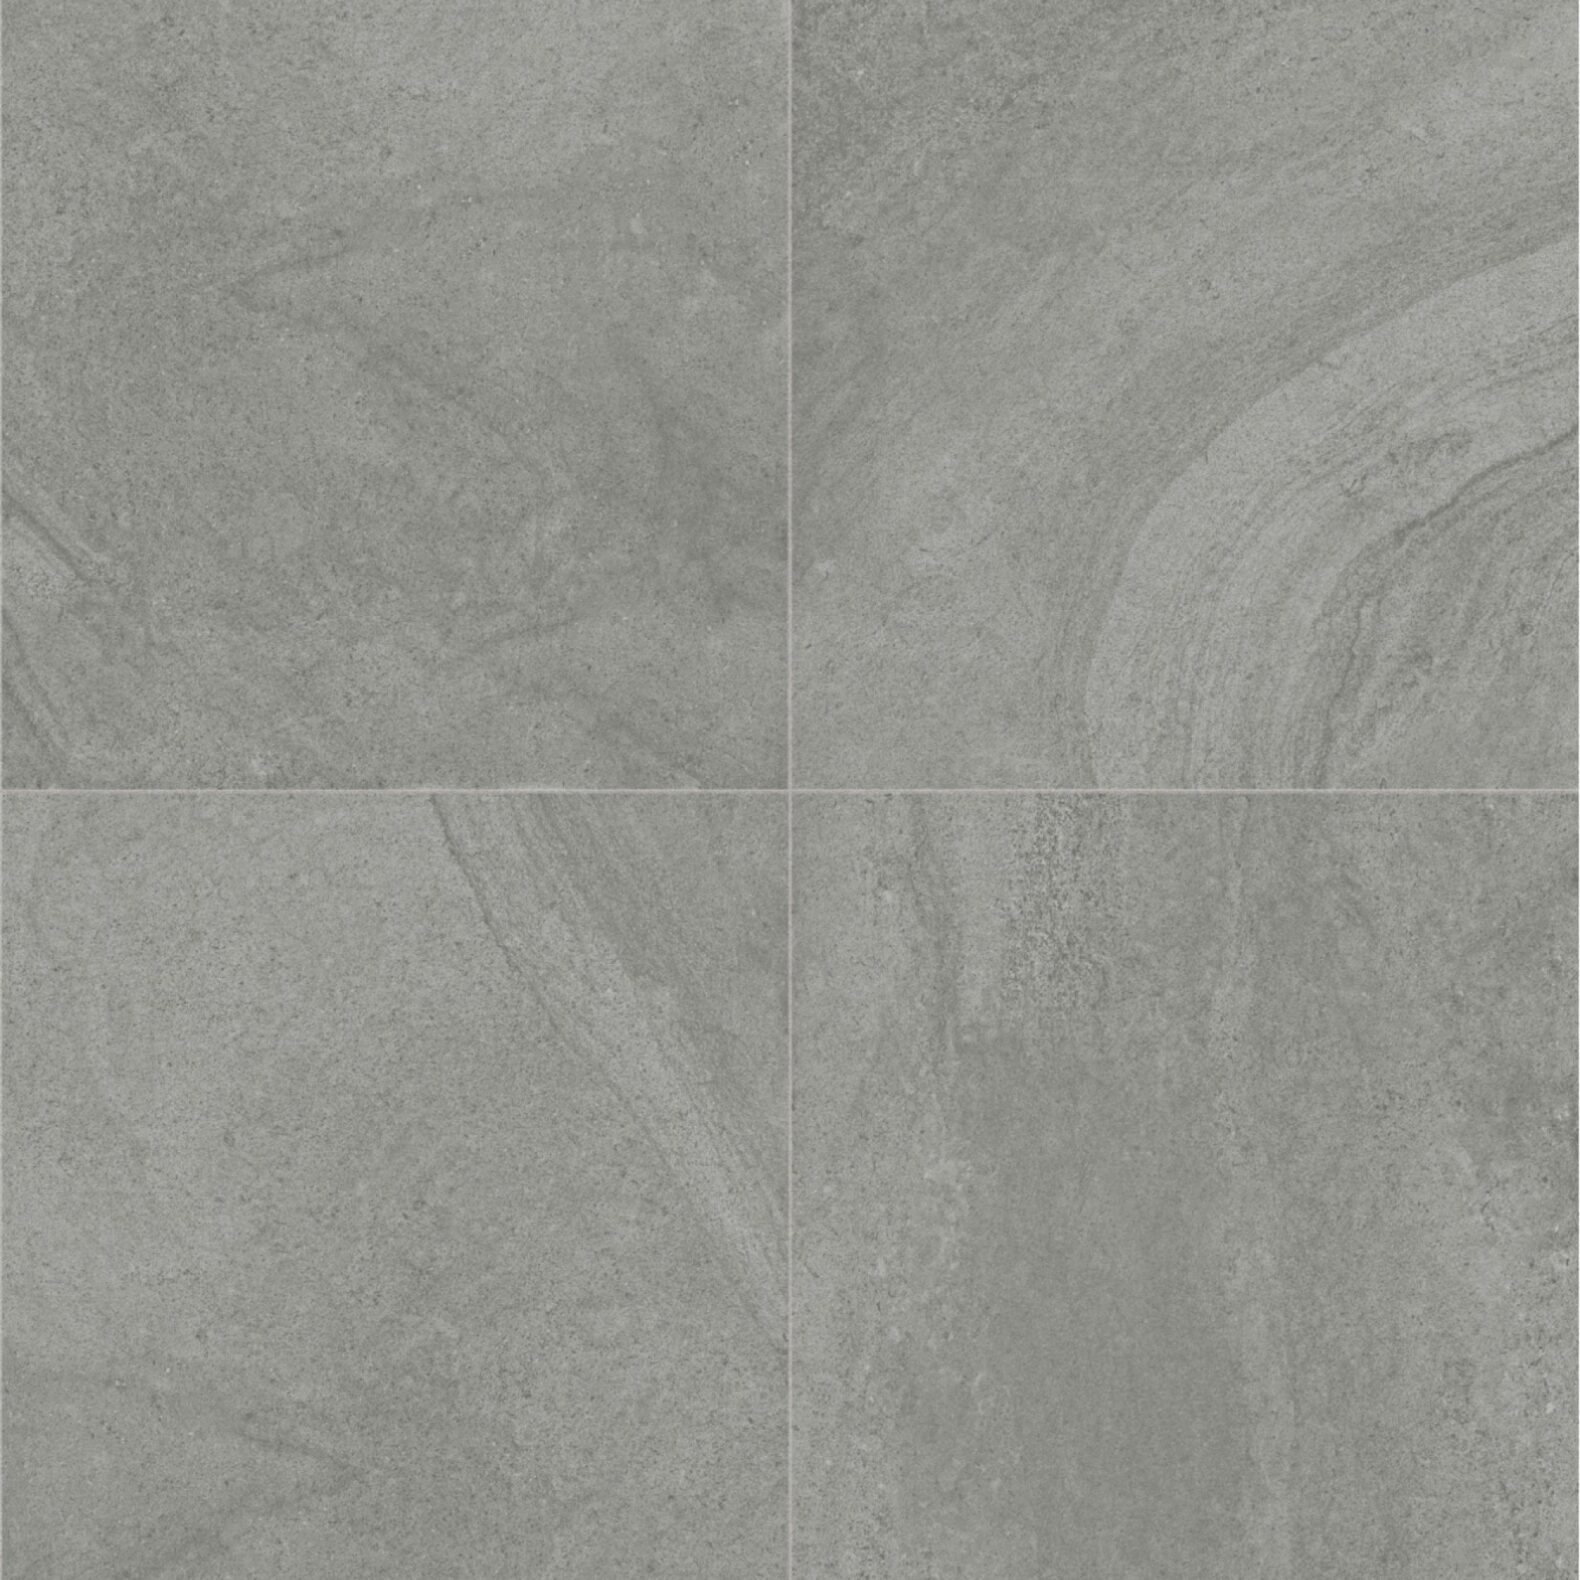 Lucca Palazzo 60x60 Gris